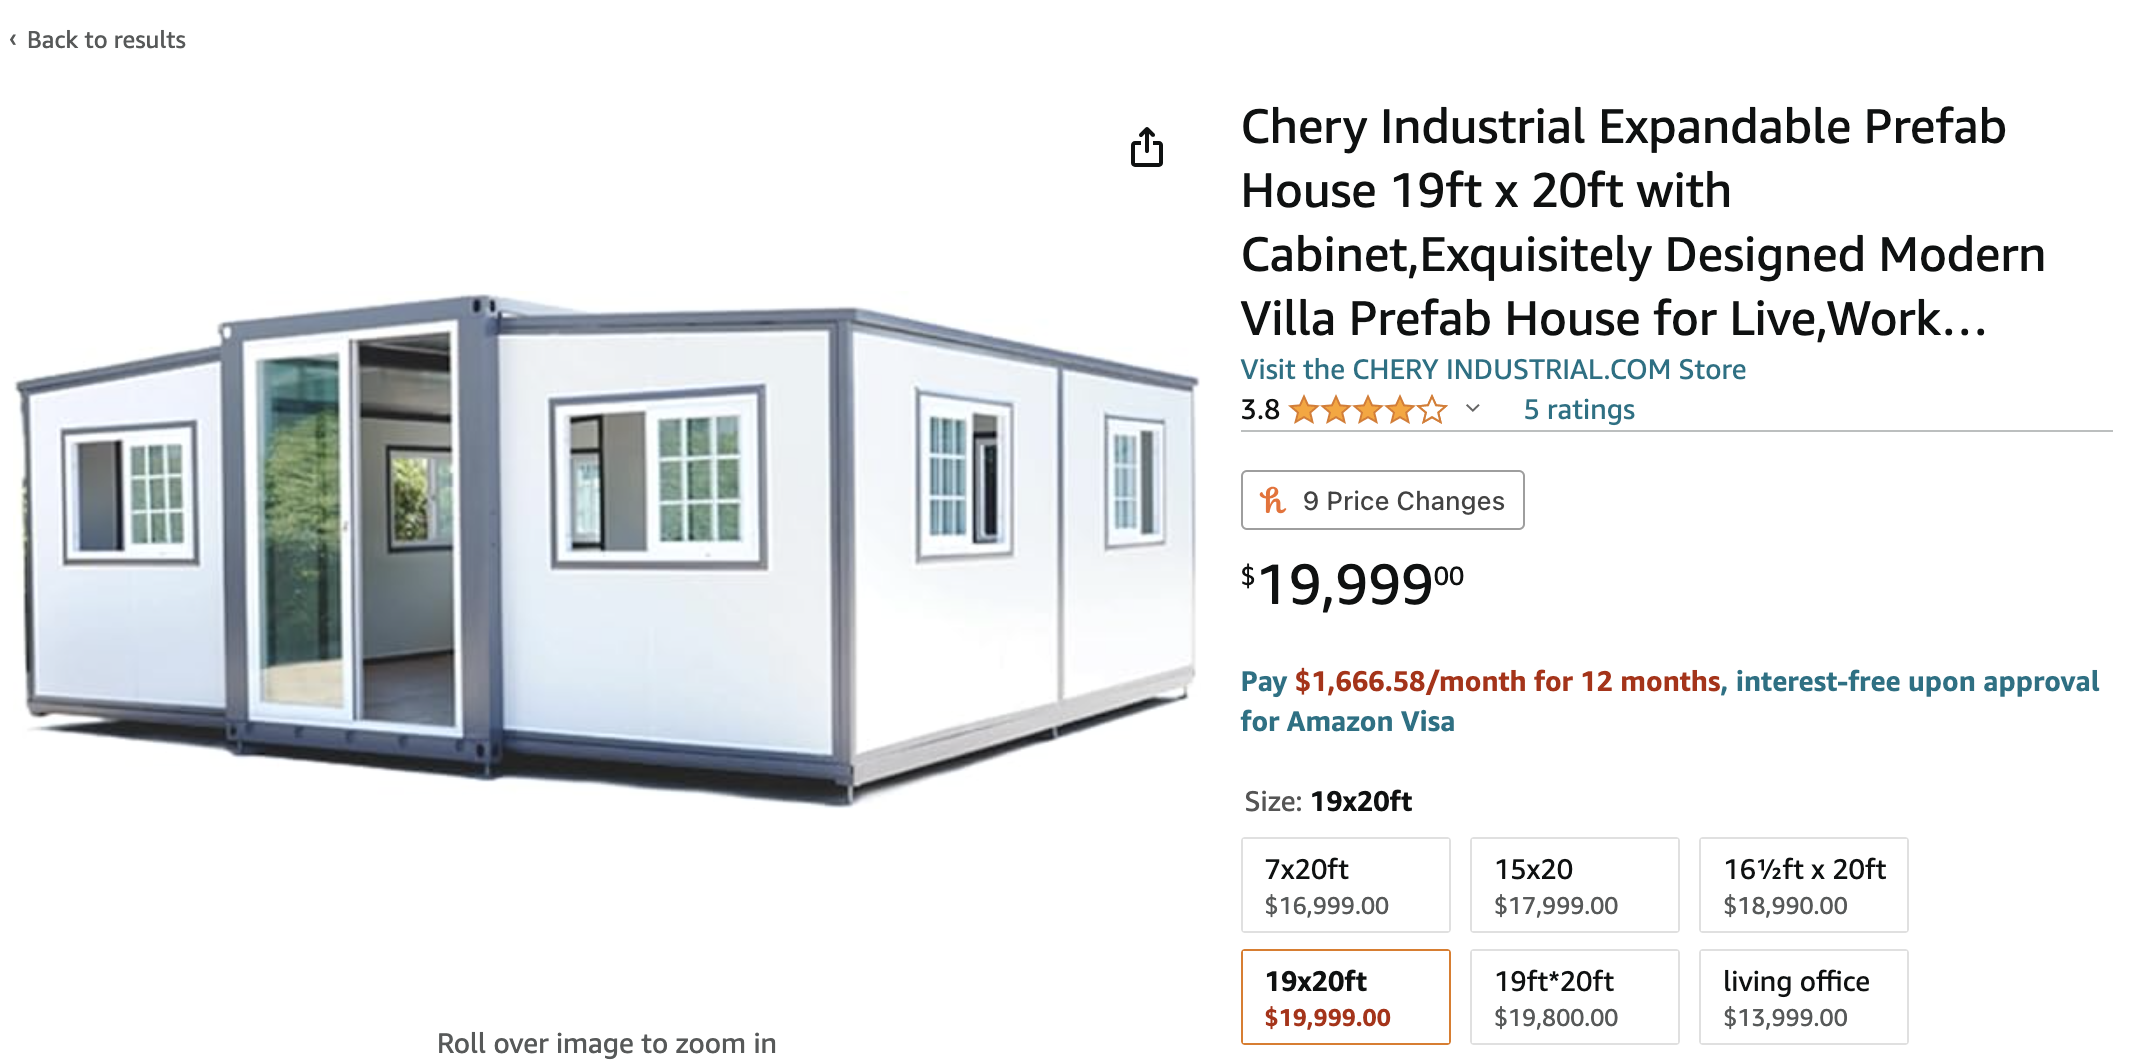 Prefab house advertised online, 19x20ft with pricing information, windows on three sides